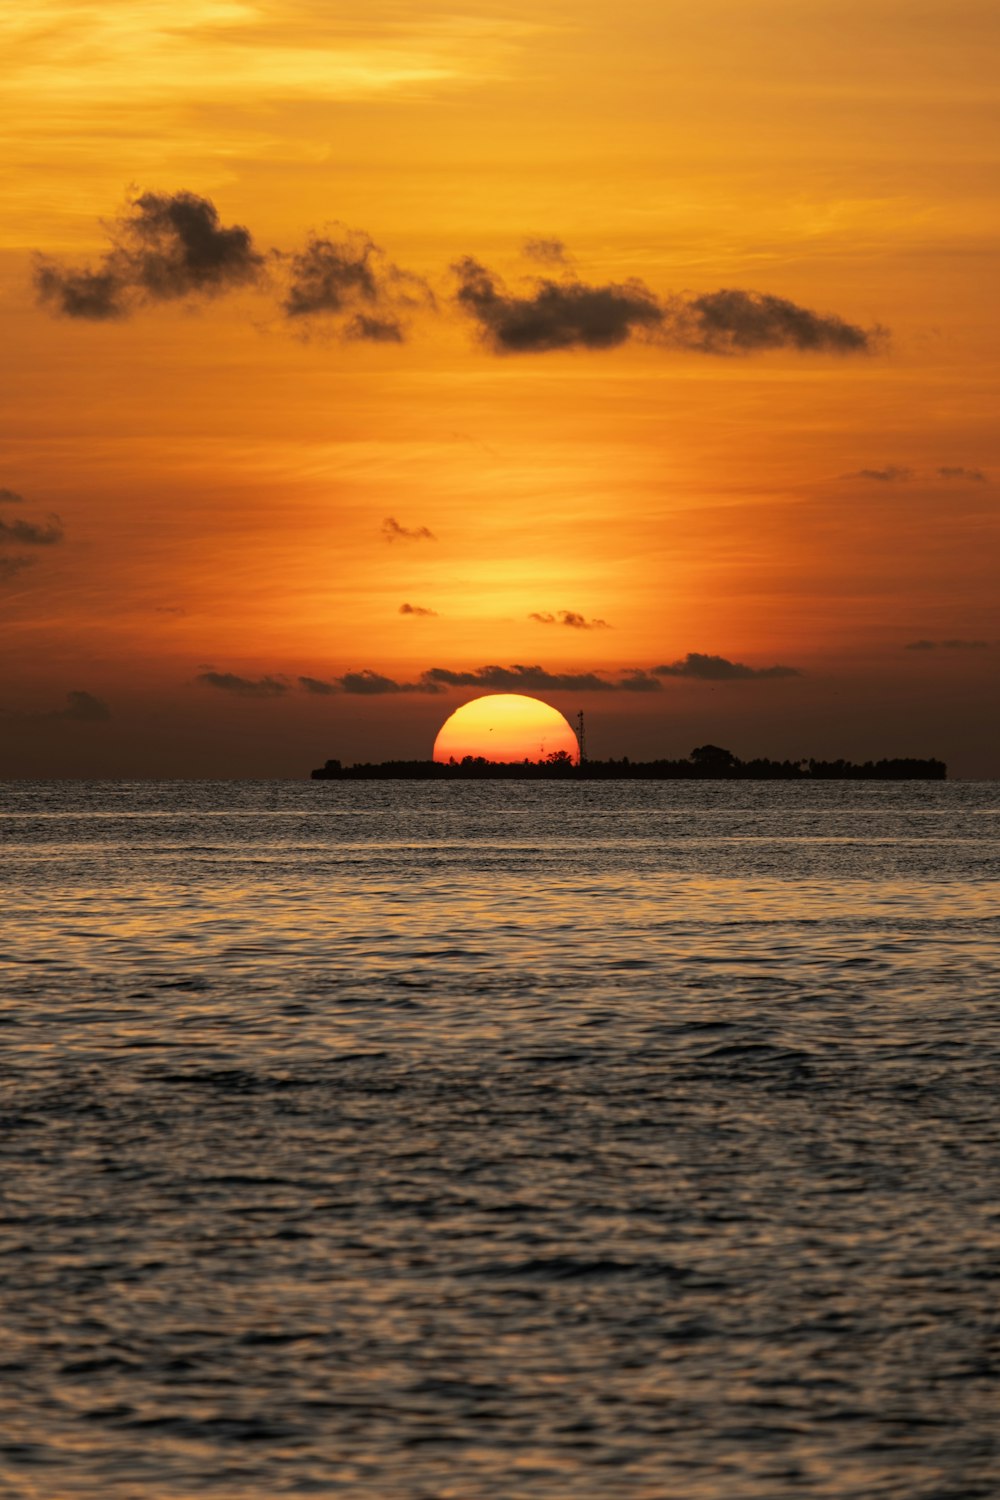 the sun is setting over the ocean with a small island in the distance